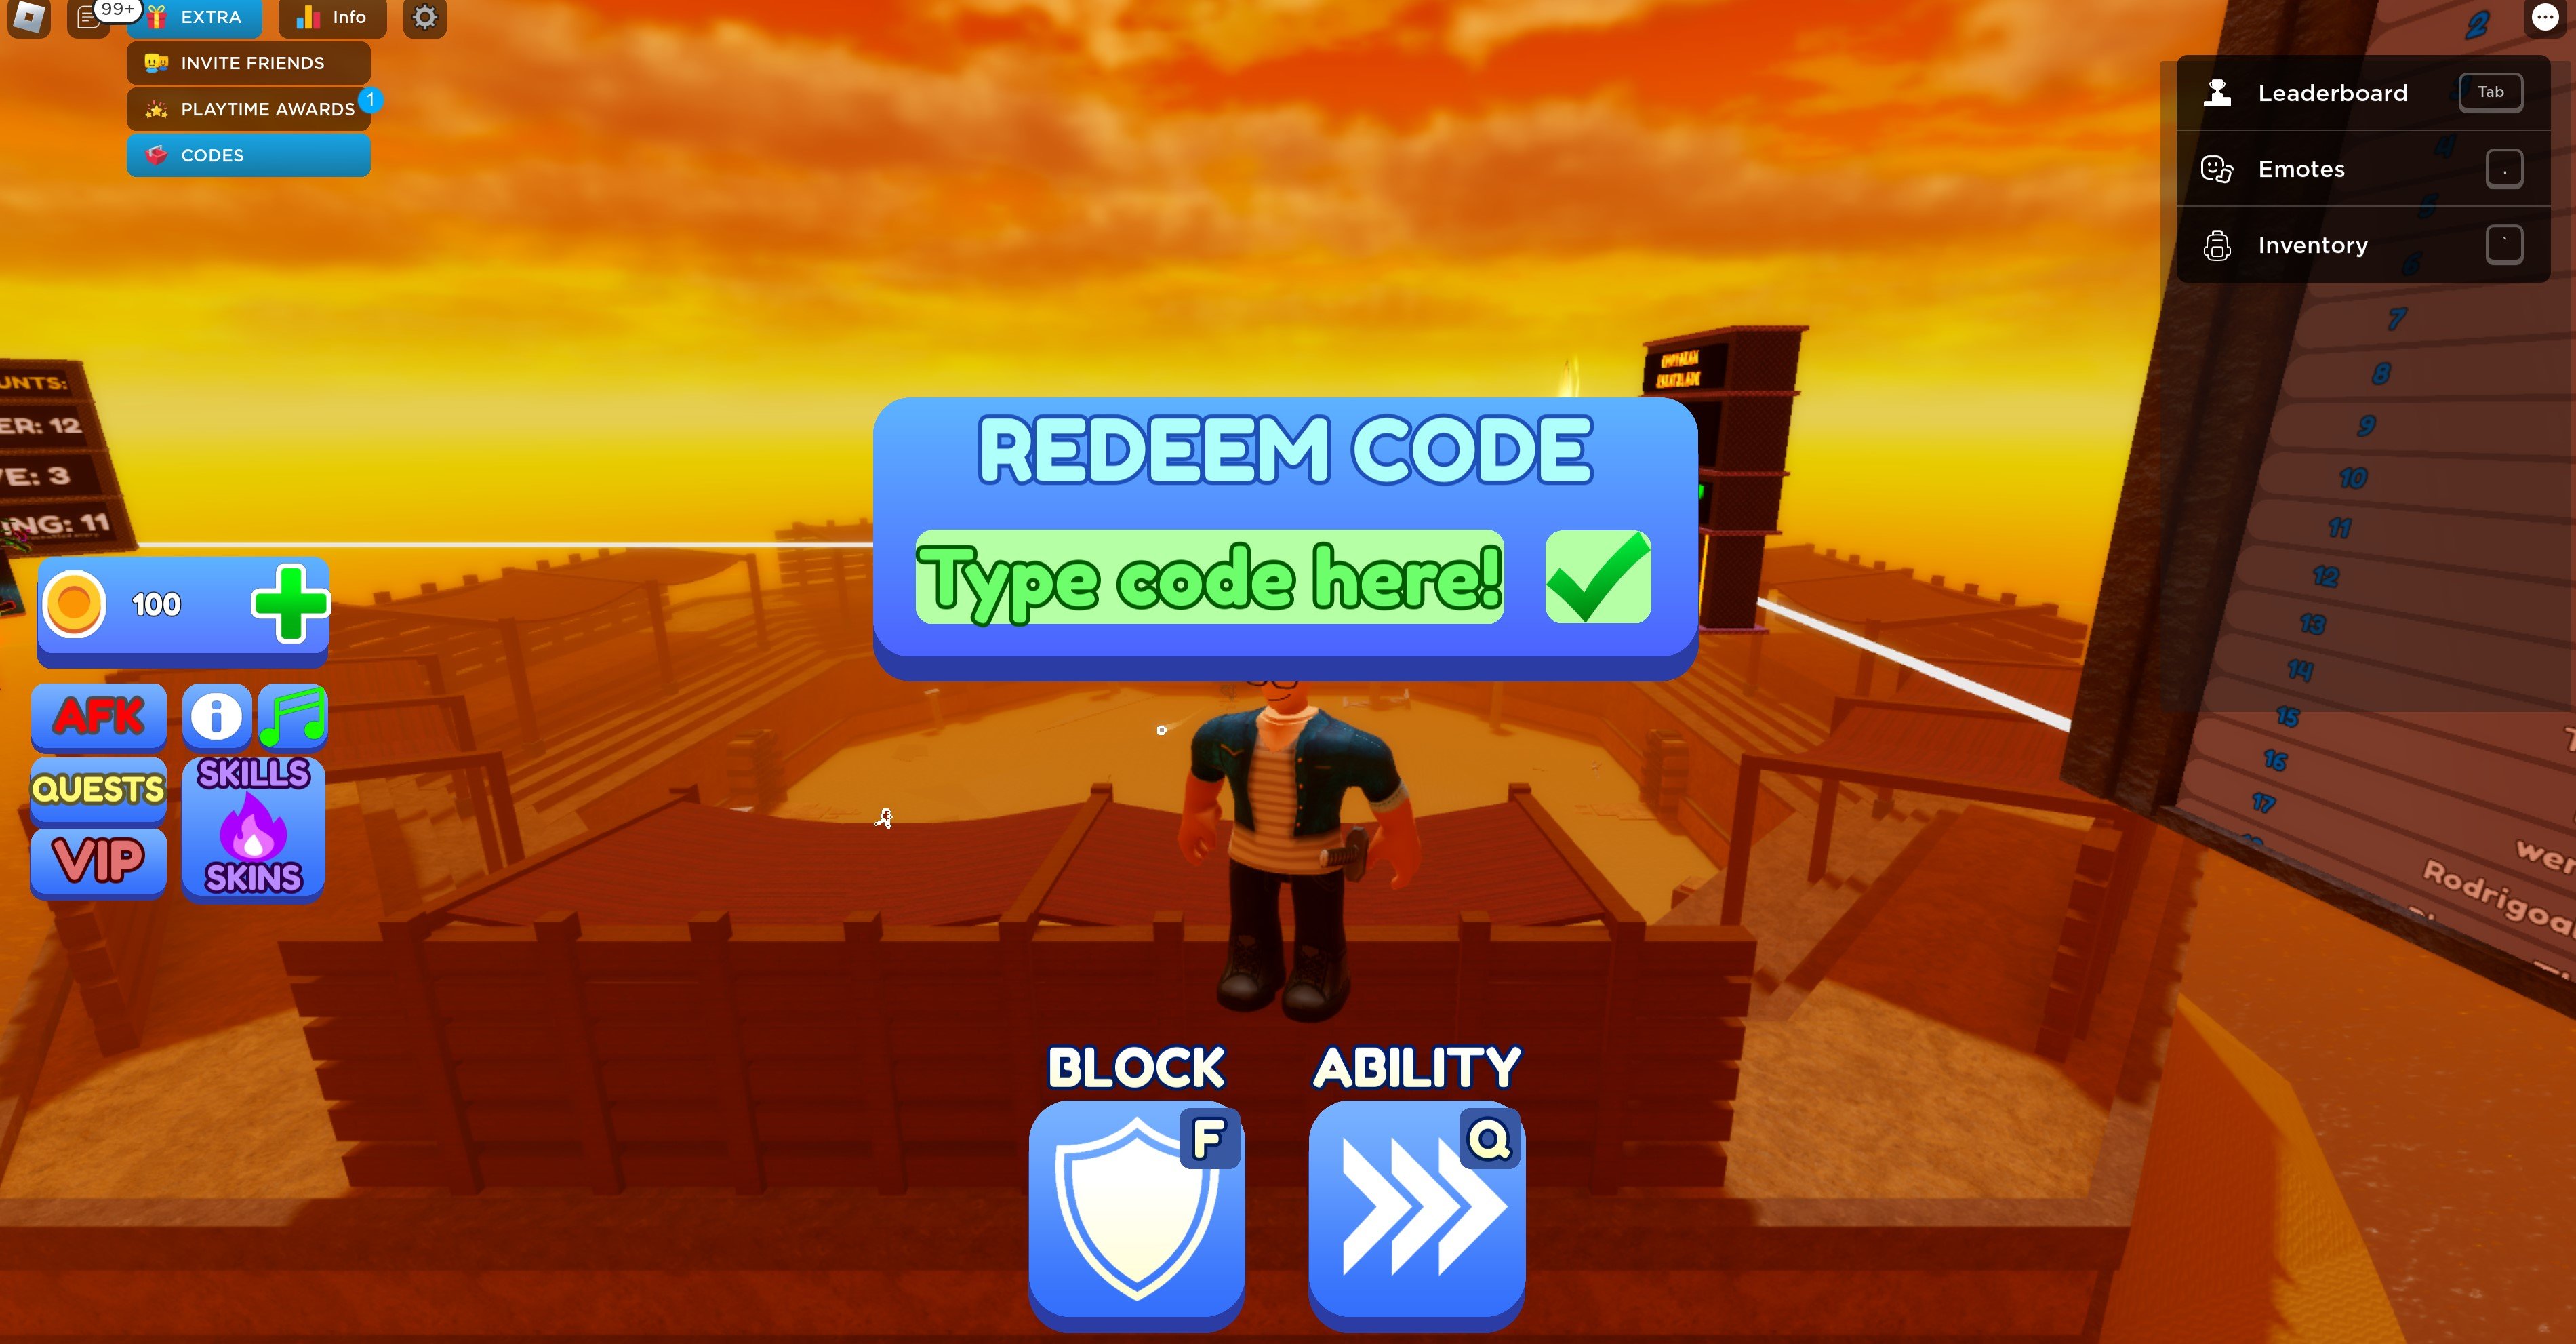 Roblox Speed Simulator X Codes (December 2023) - Pro Game Guides